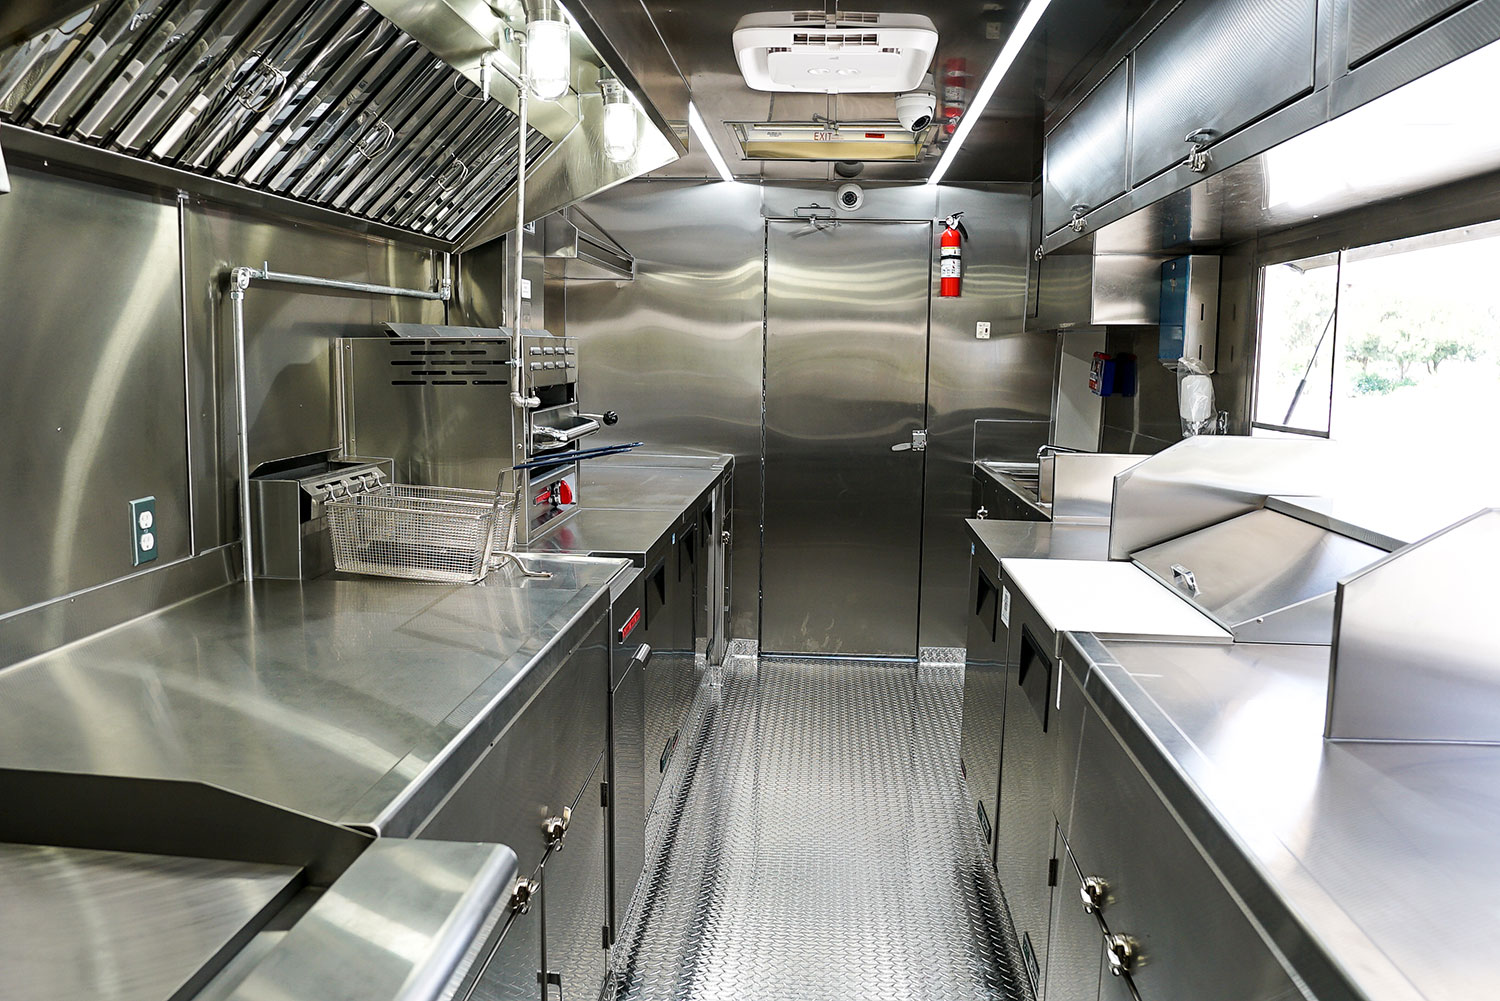 Building a Food Truck 101: Installing Safety Equipment